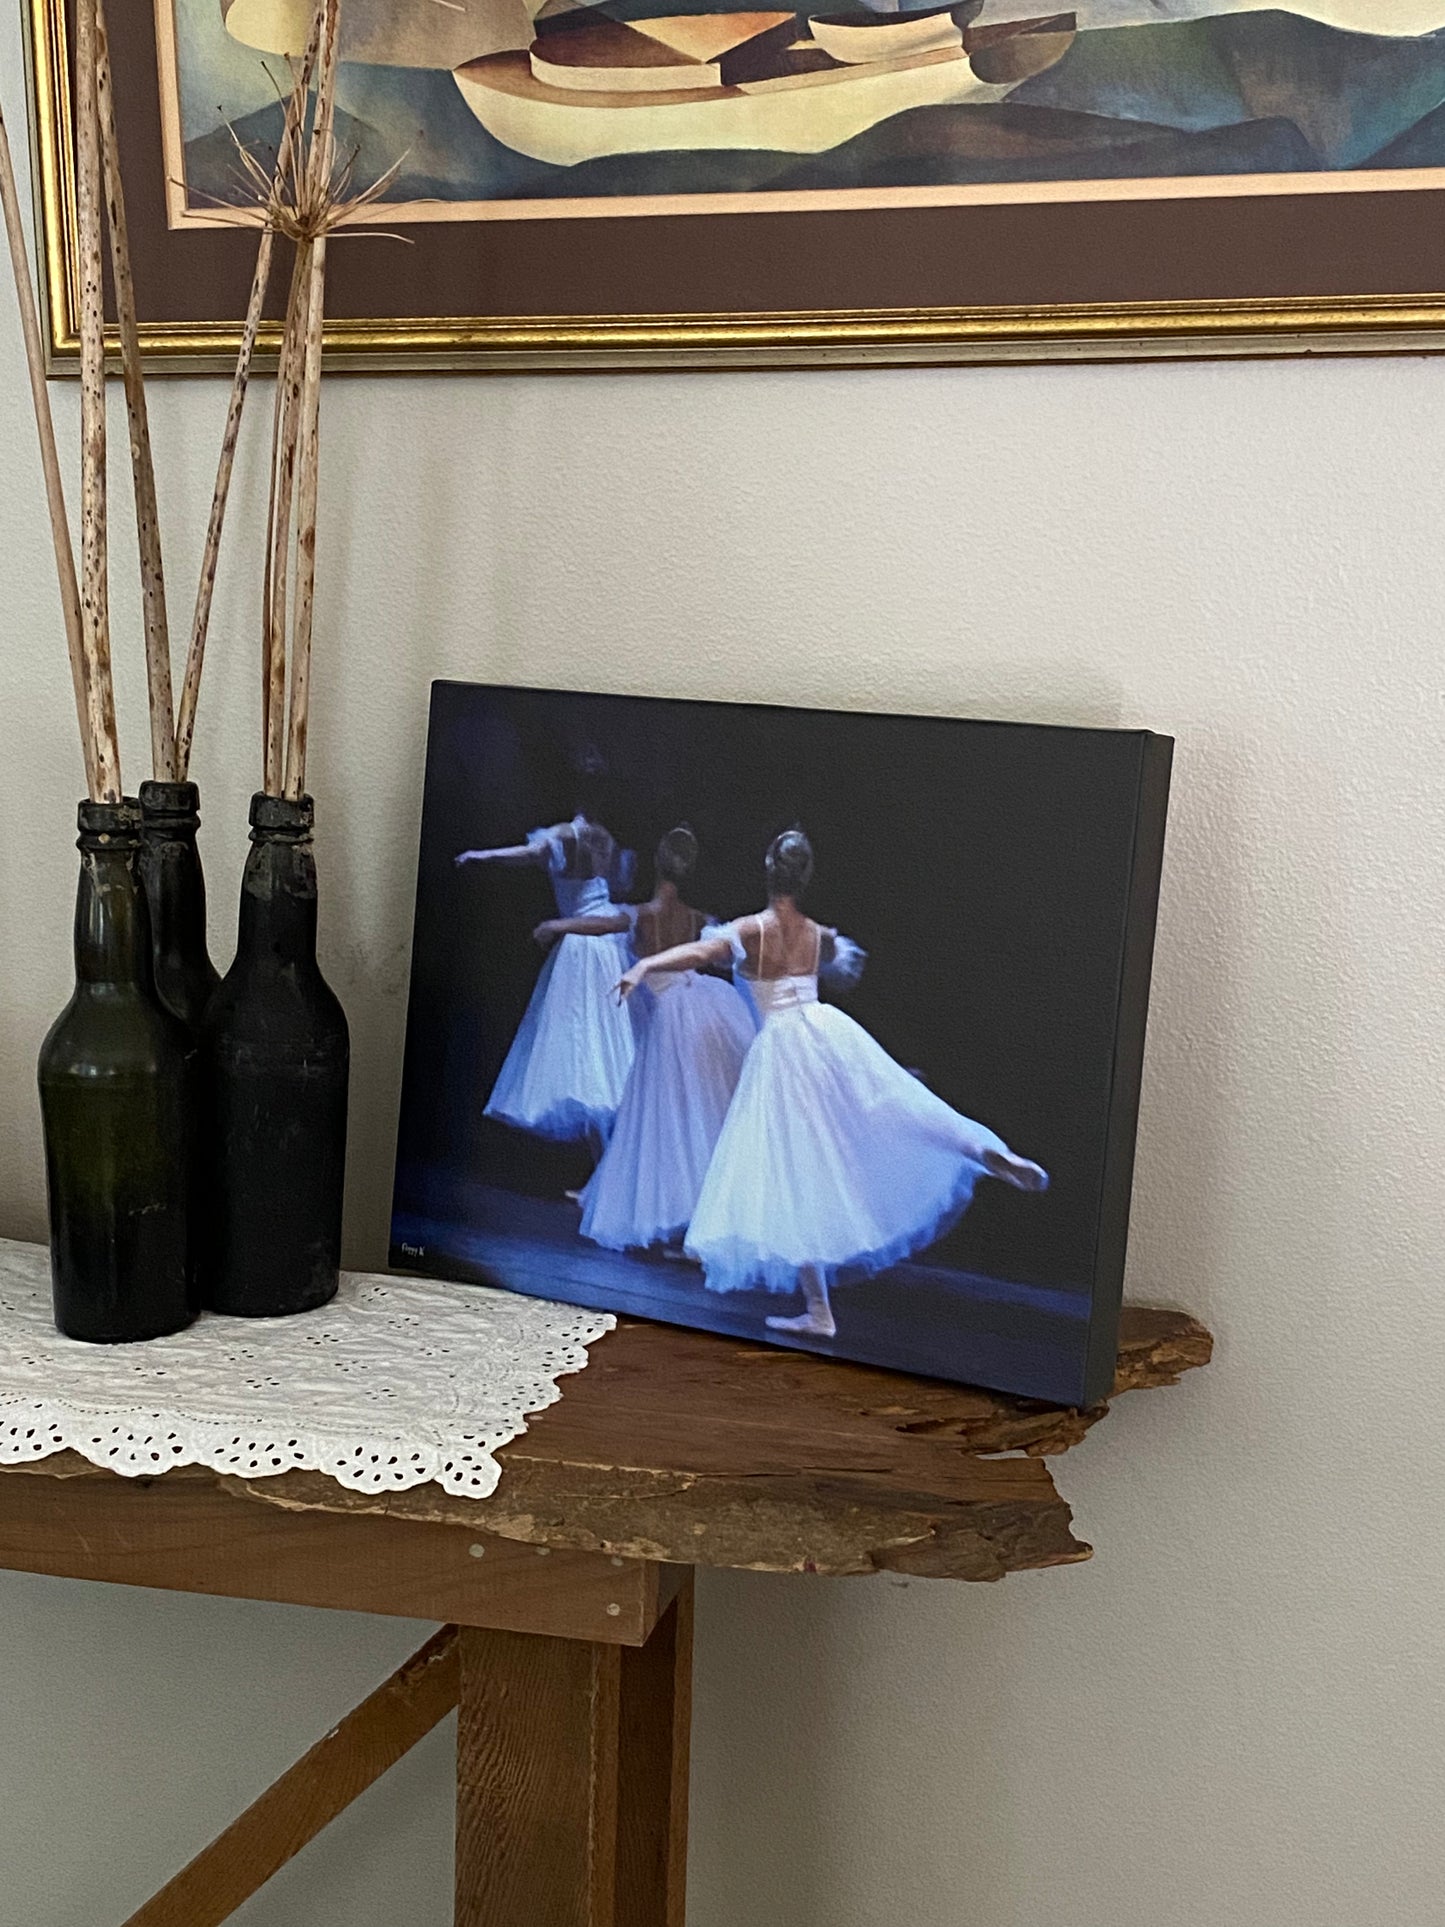 a photo of a painting placed on a table in a home decor setting of beautiful ballerinas performing on a stage with a dark backdrop